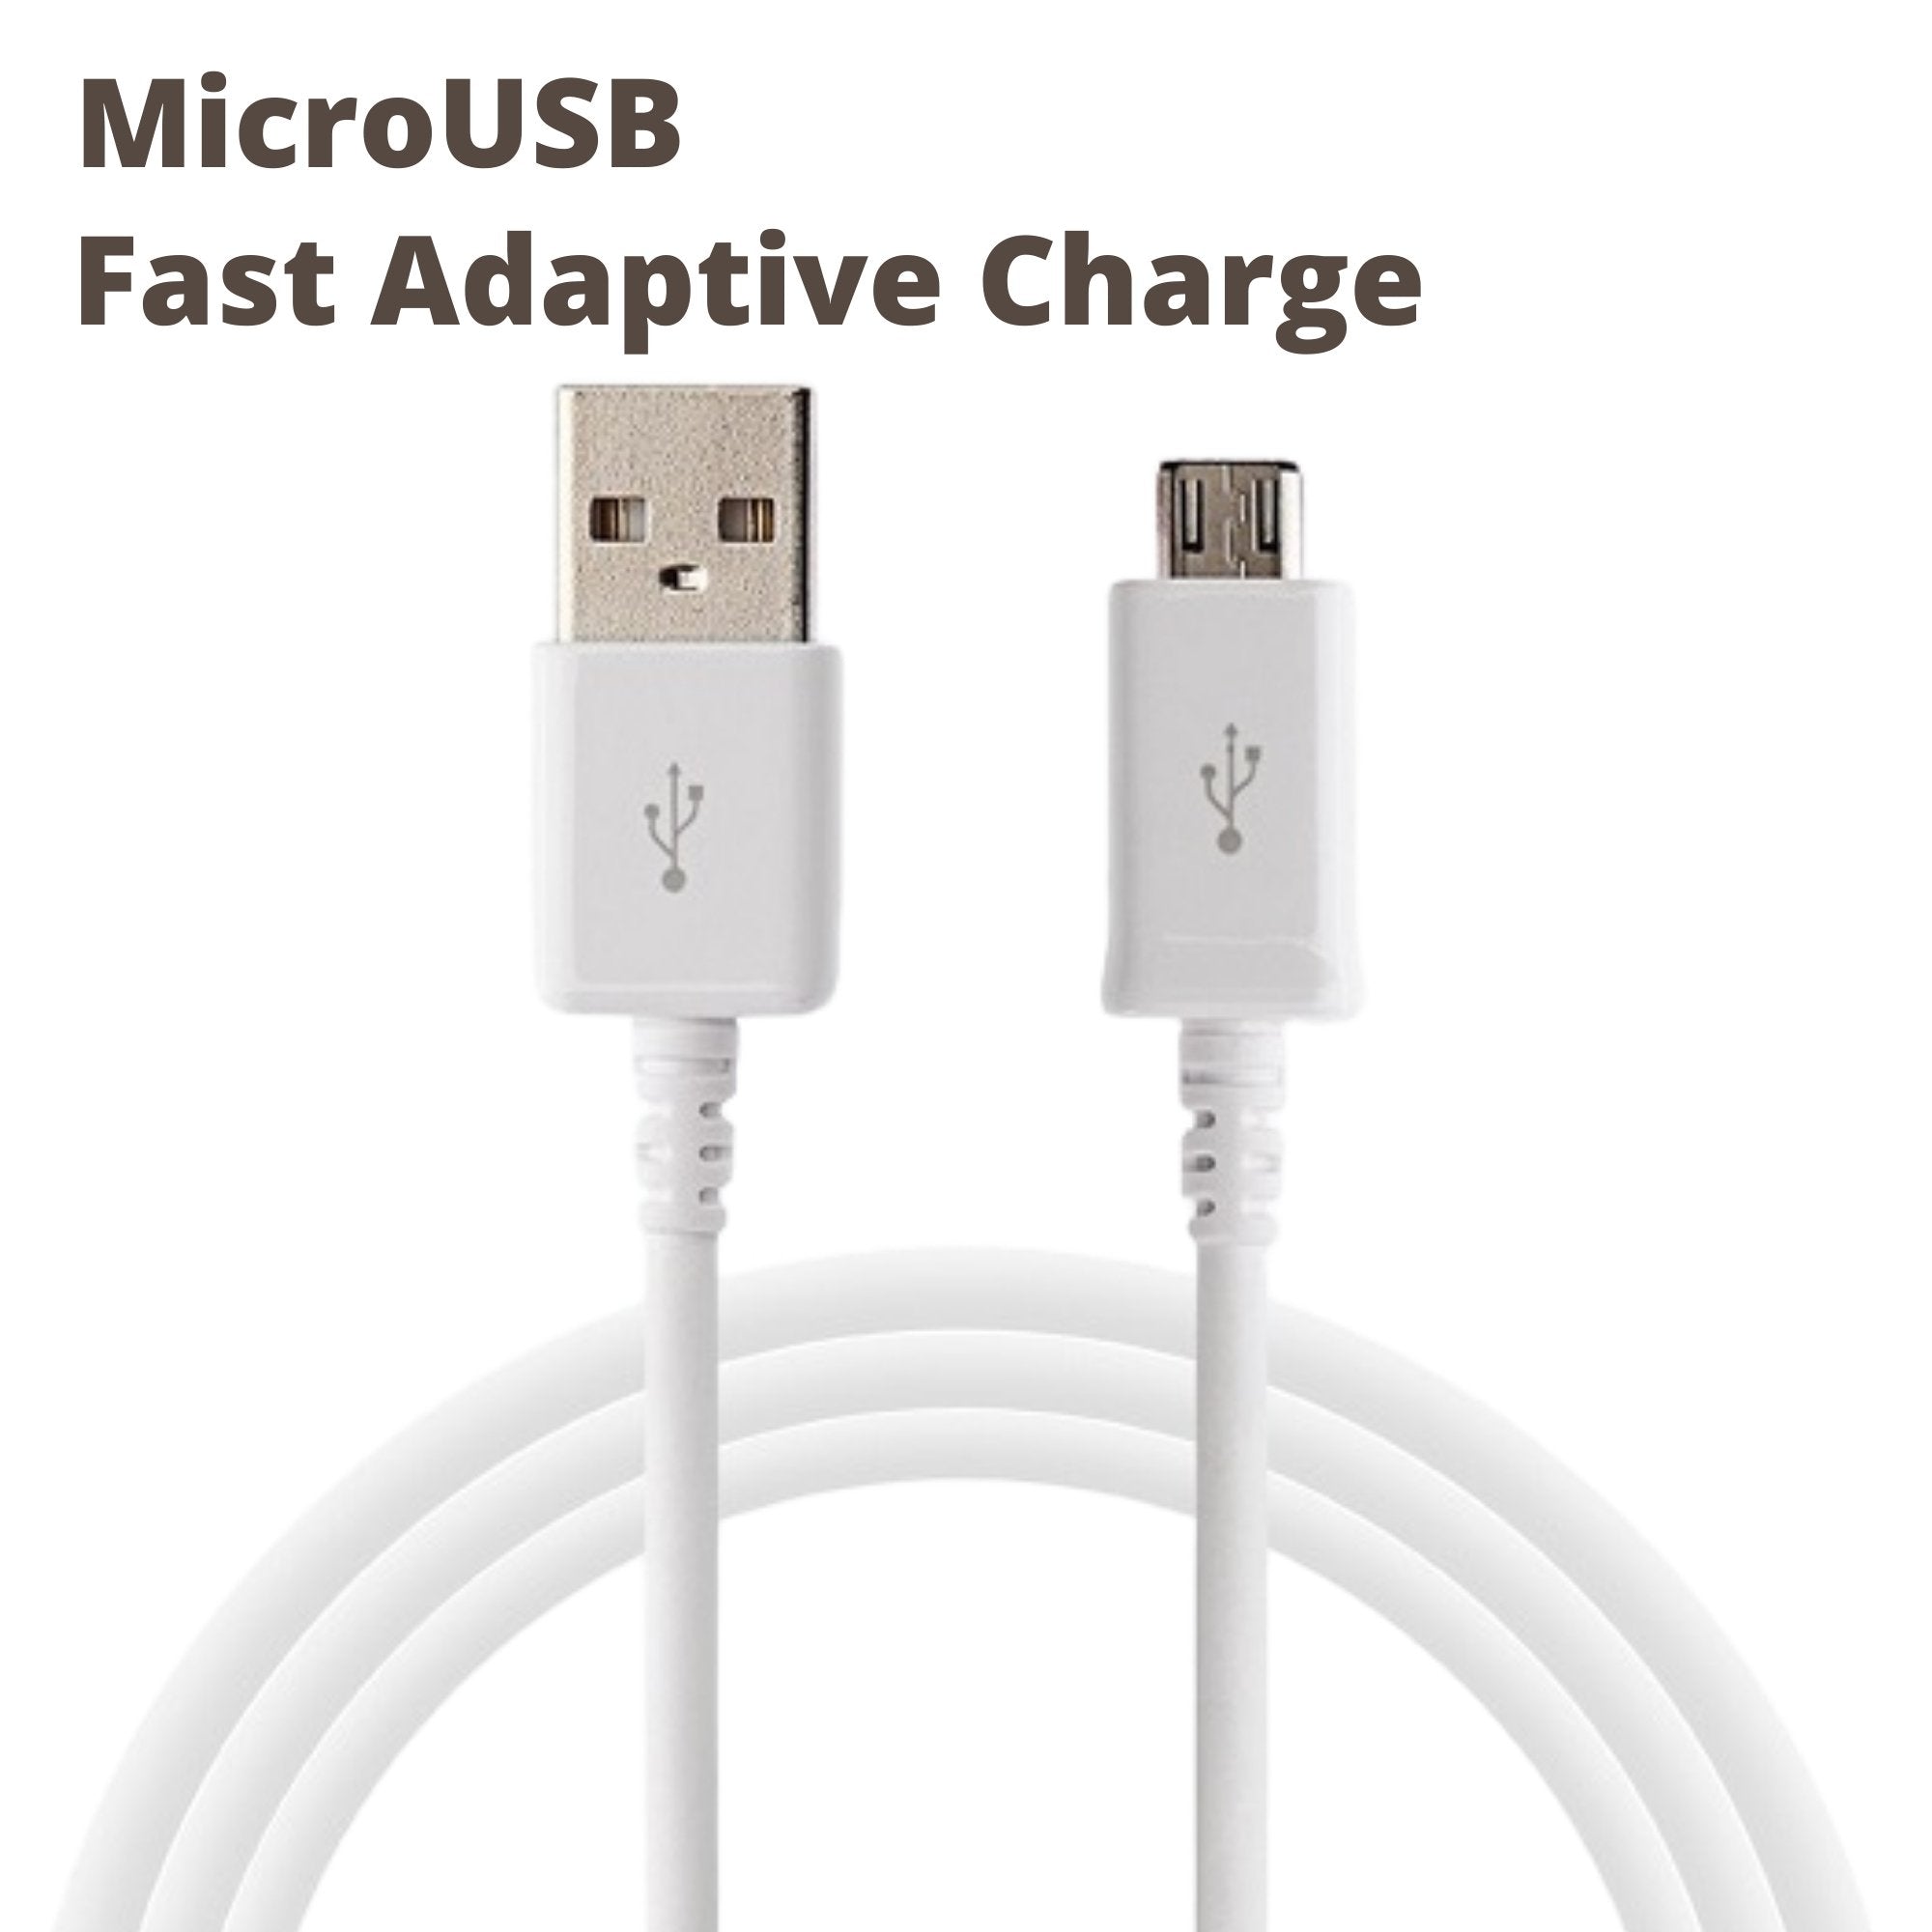 Samsung A10 Adaptive Mobile Charger 2 Amp With Fast Data Cable White